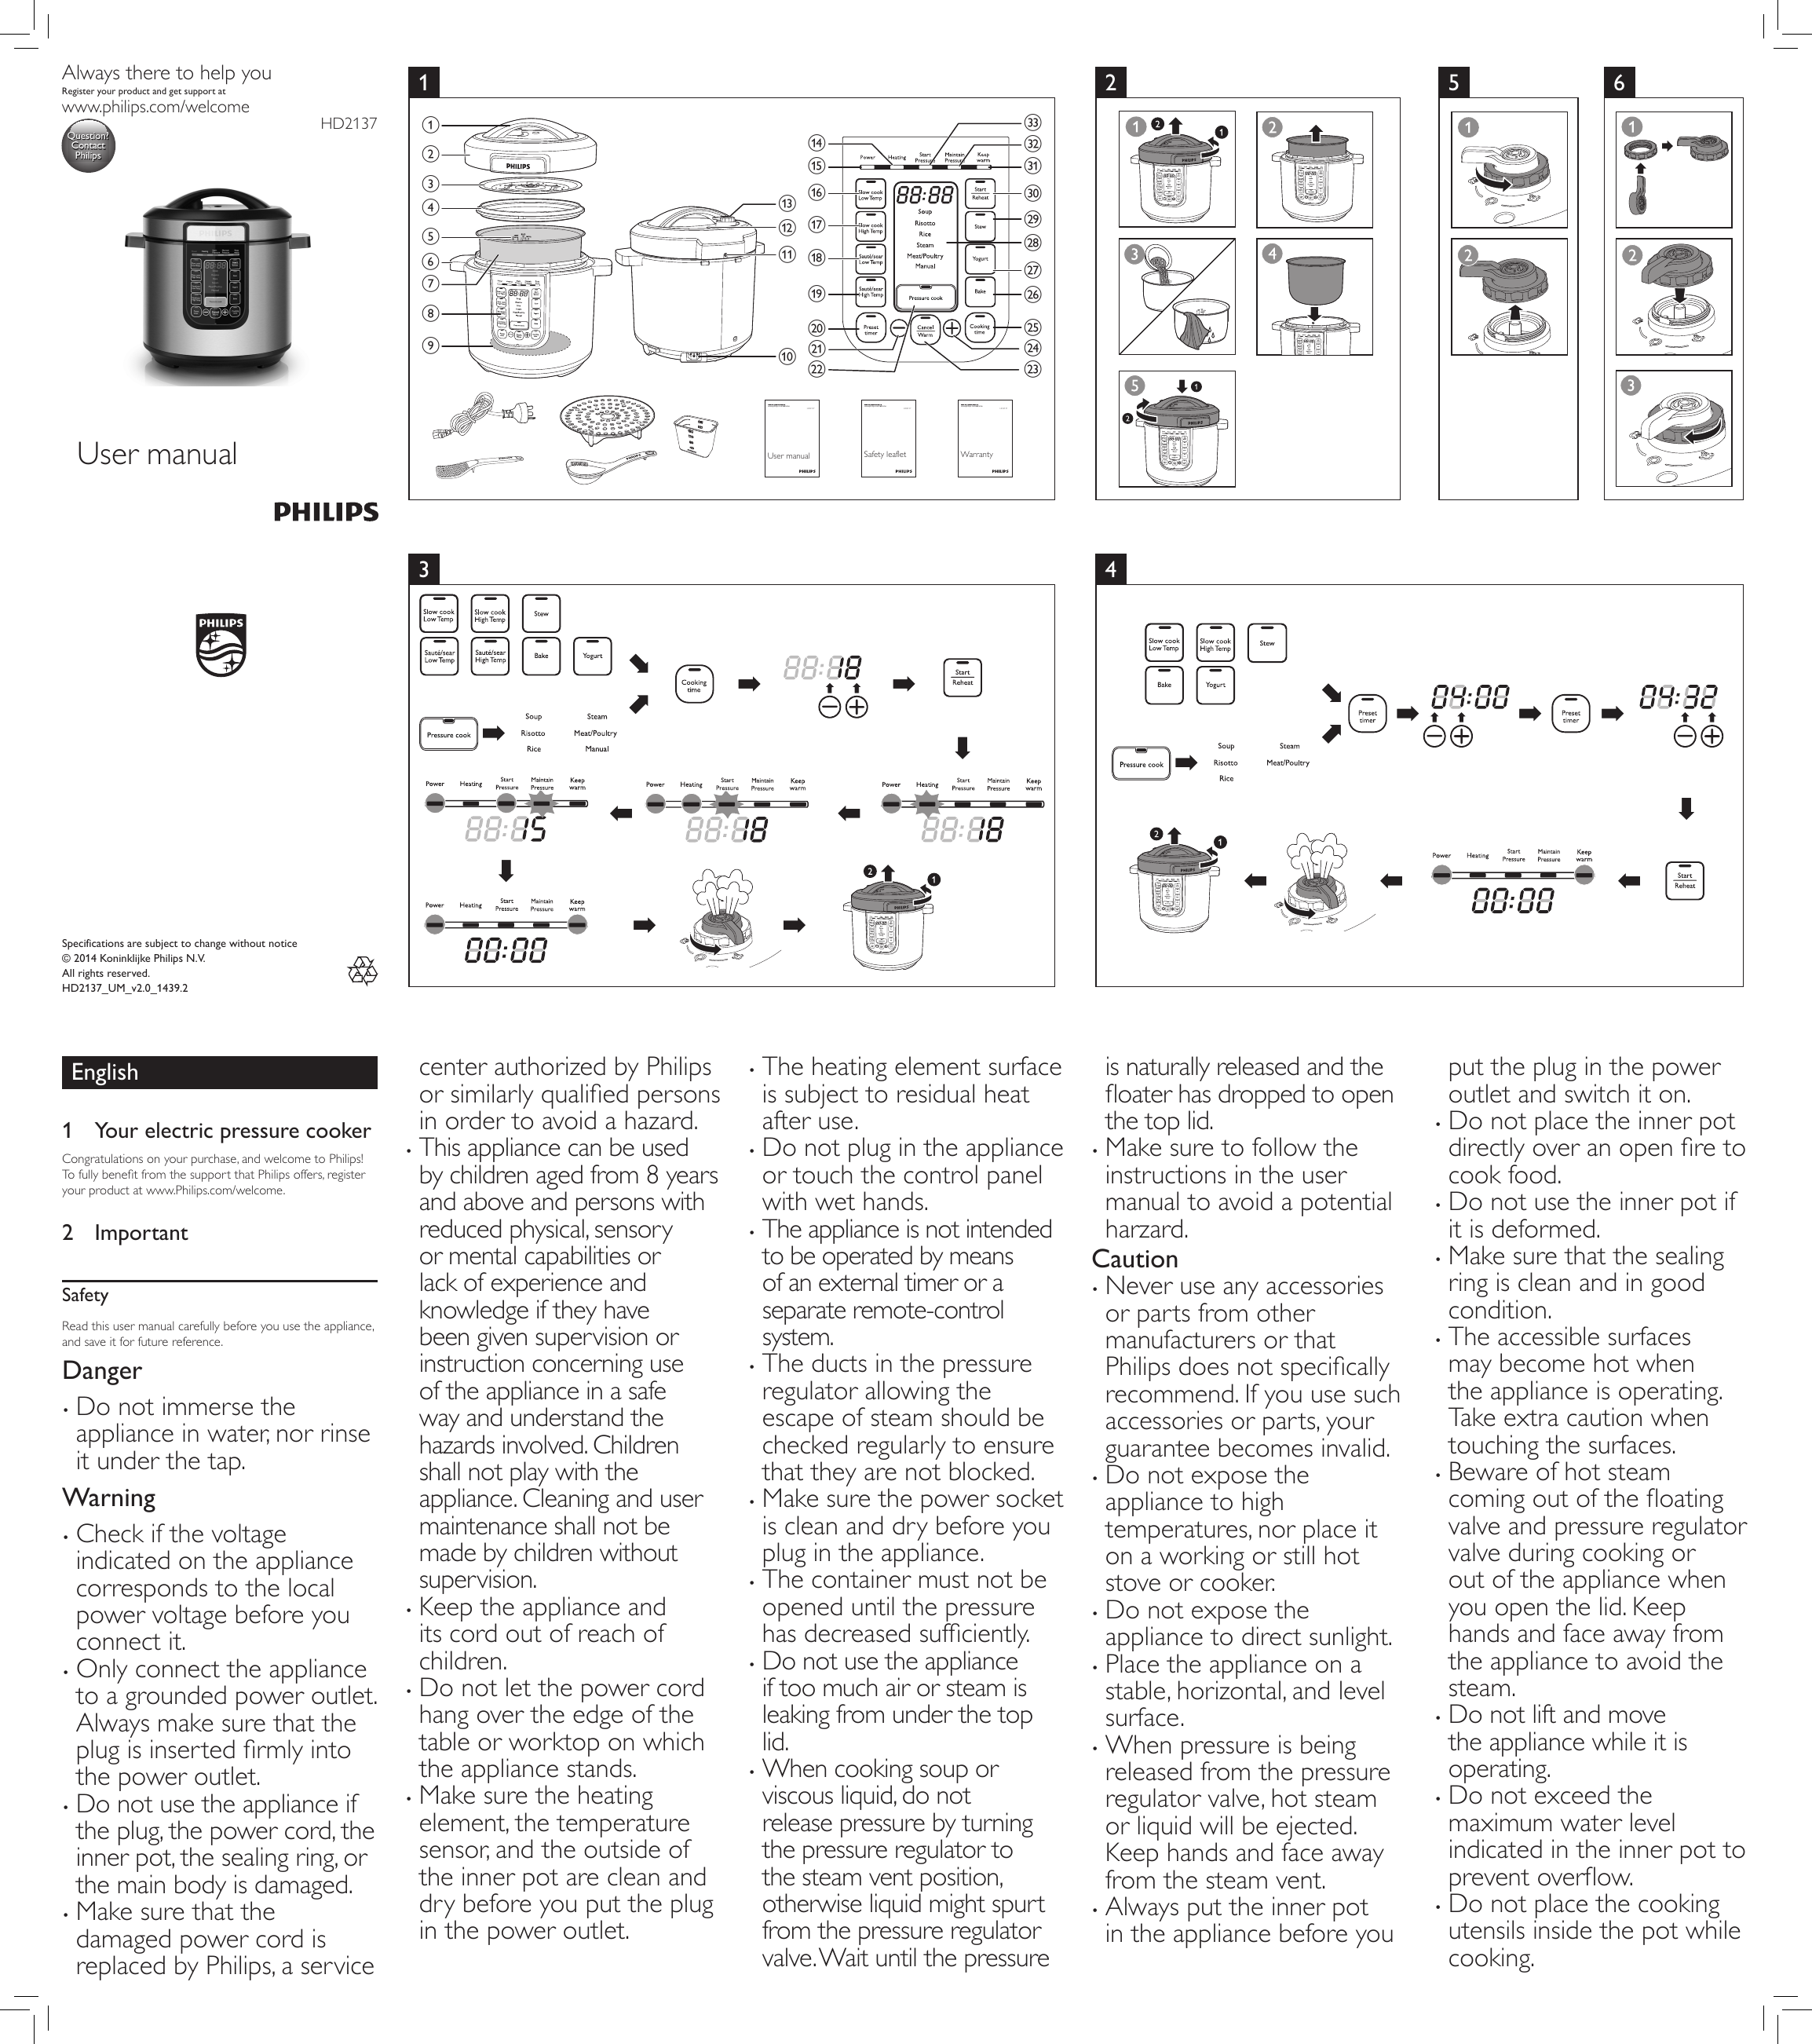 Page 1 of 2 - Philips HD2137 User Manual 72 Dfu Eng